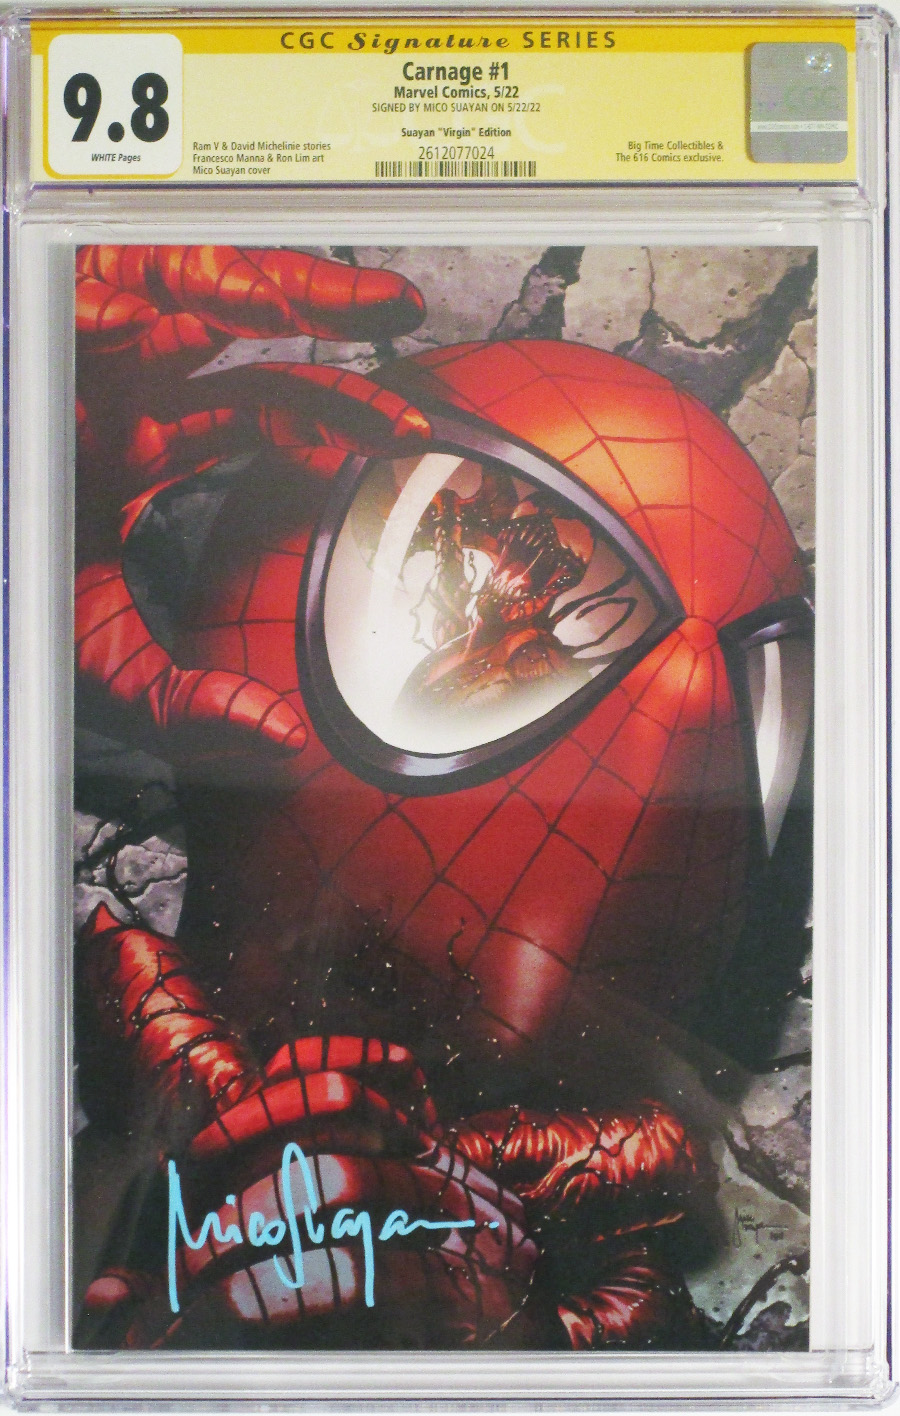 Carnage Vol 3 #1 Cover K CGC Signature Series 9.8 Mico Suayan Virgin Variant Cover Signed by Mico Suayan